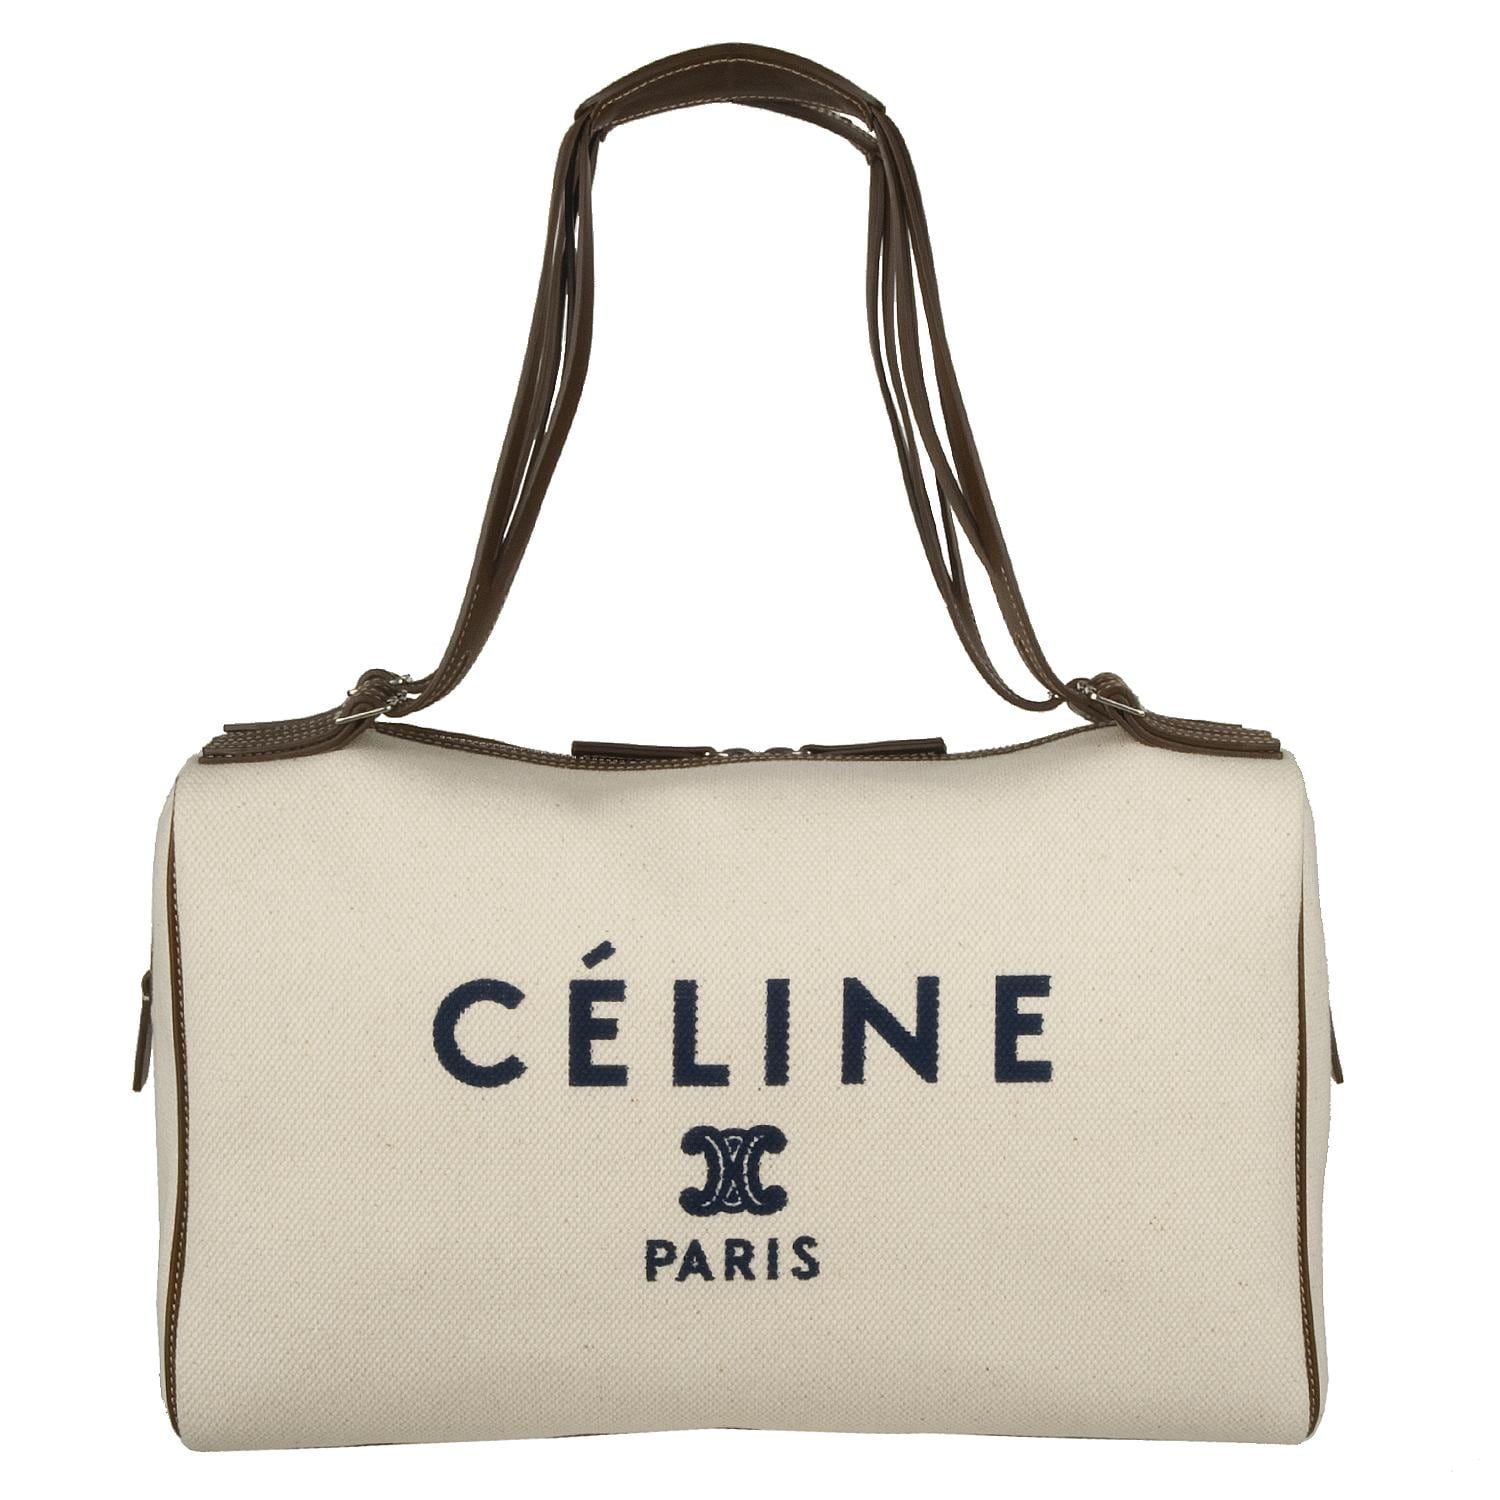 where to purchase celine bags - Celine Ivory Logo Canvas Bowler Bag - 13666162 - Overstock.com ...